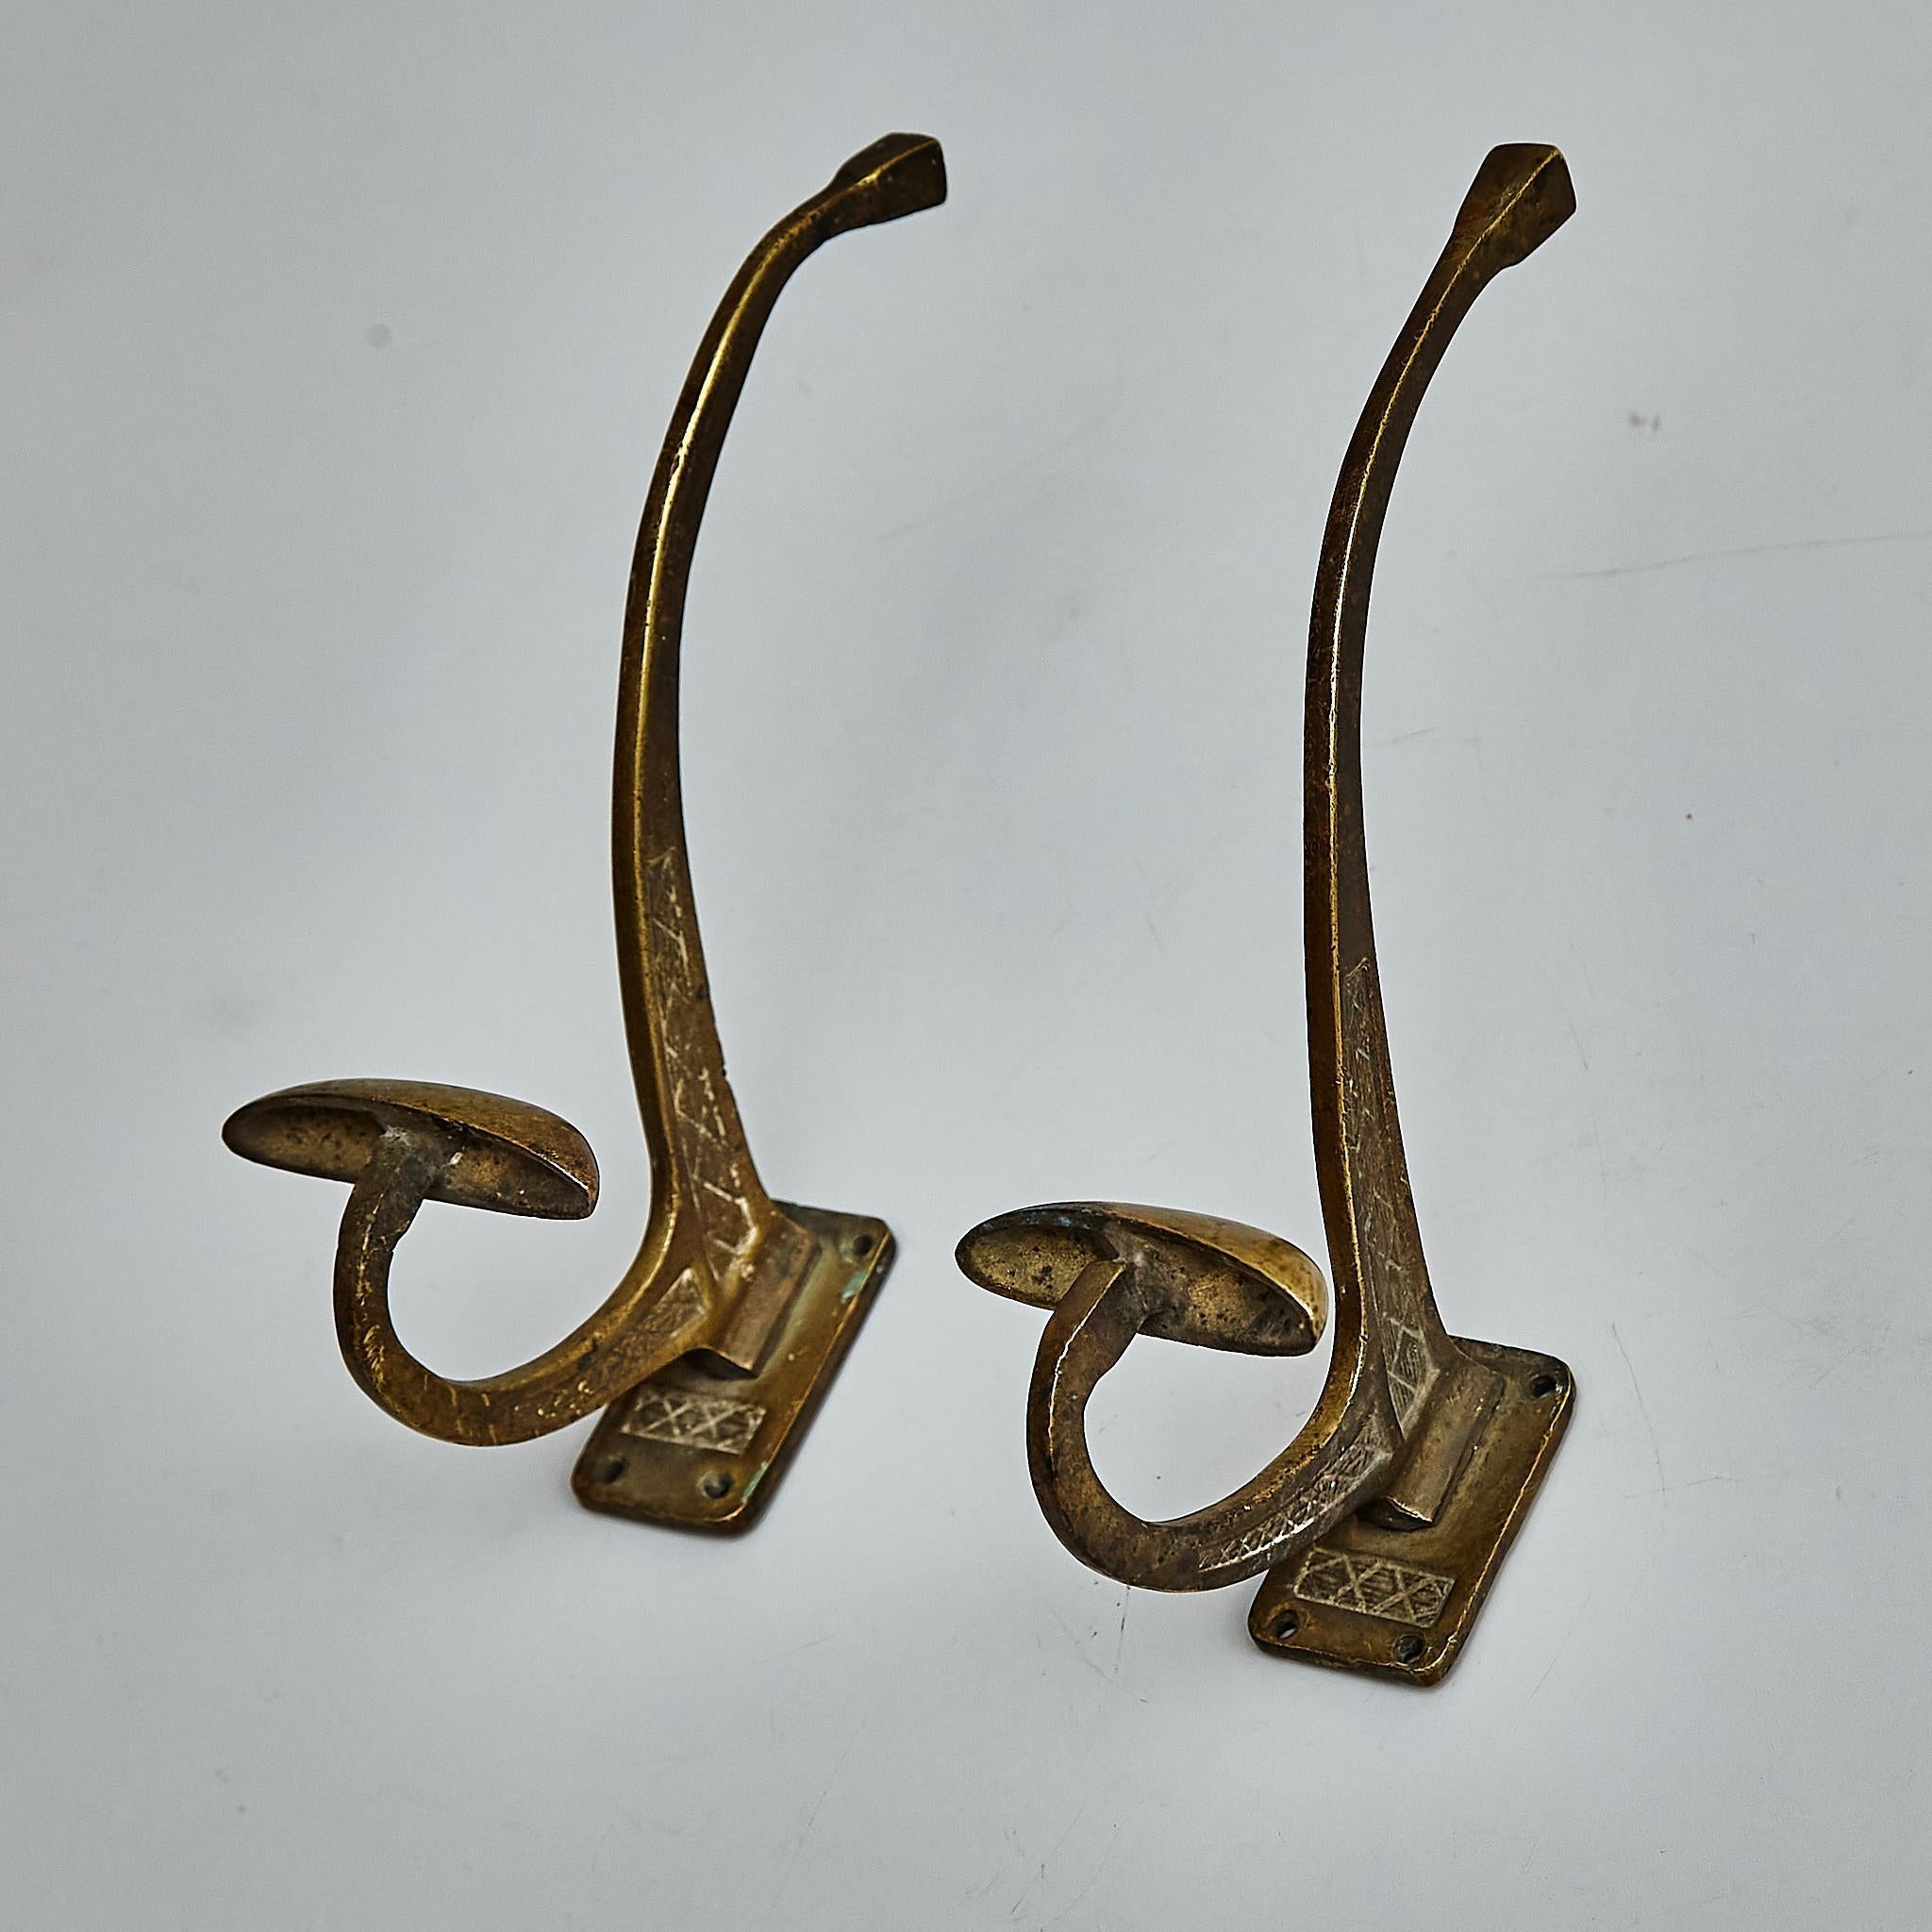 1940s Modernist Metal Coat Hangers with Stunning Patina For Sale 1